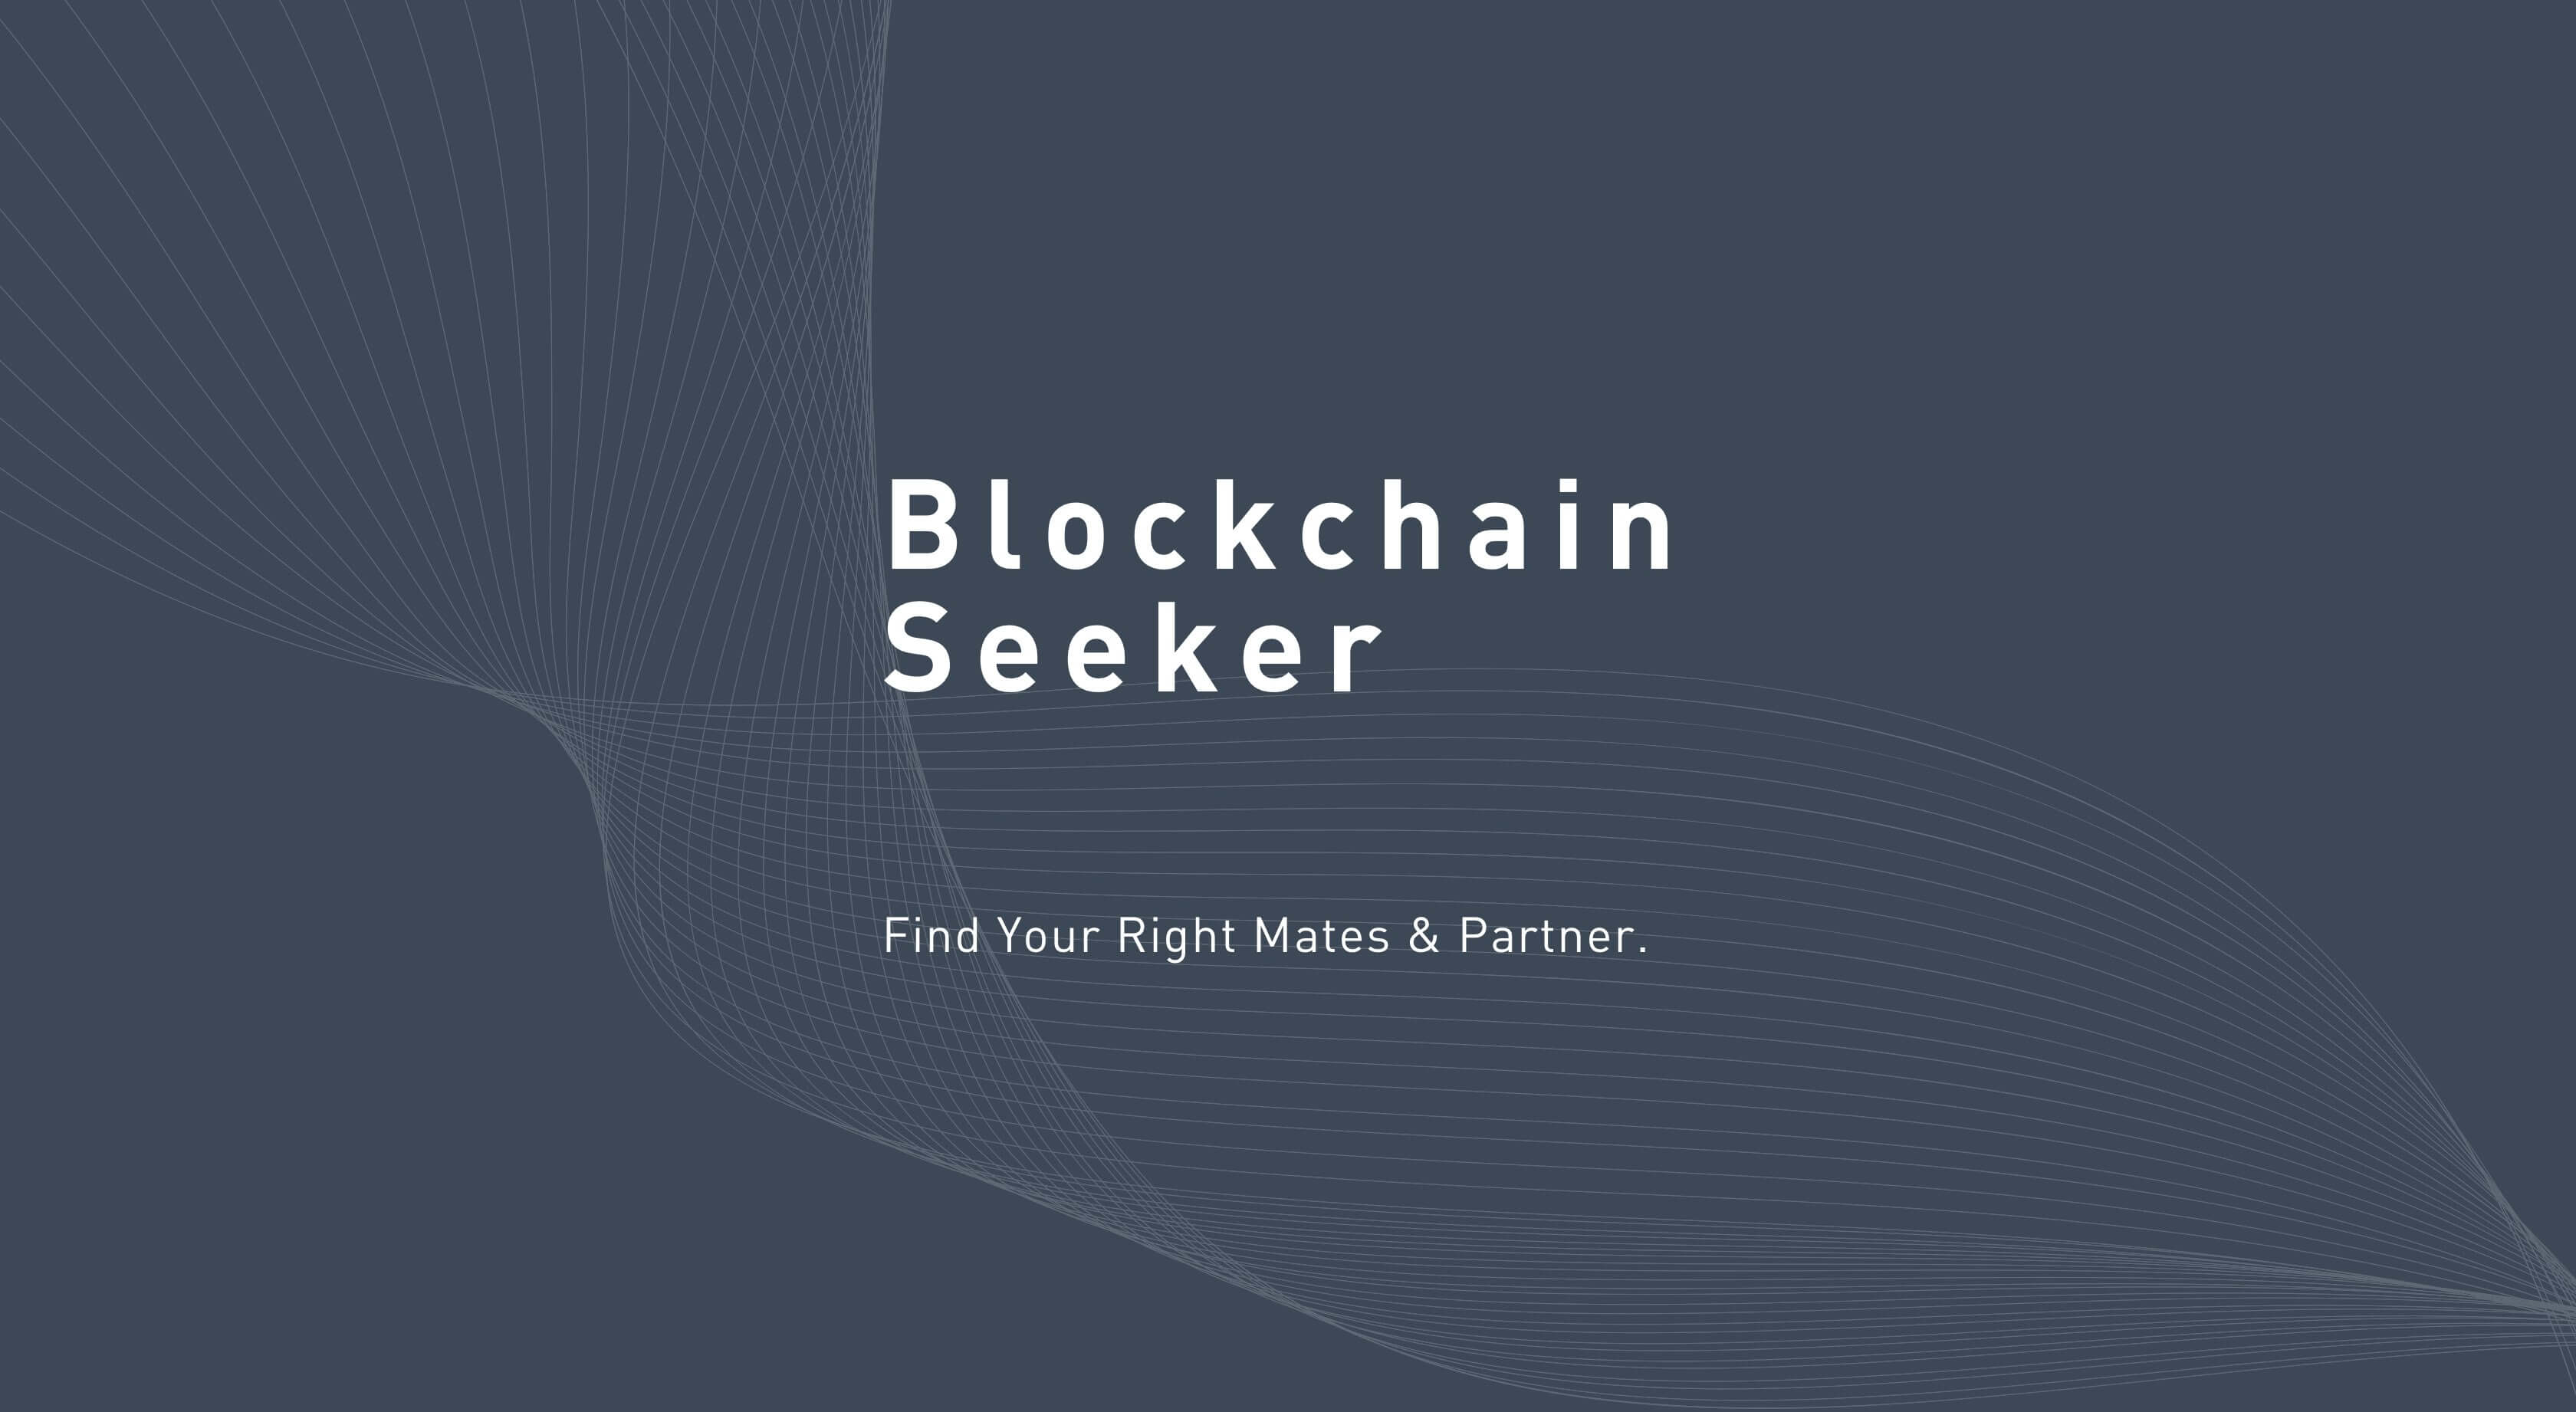 Blockchain
Seeker
Find Your Right Mates & Partner.